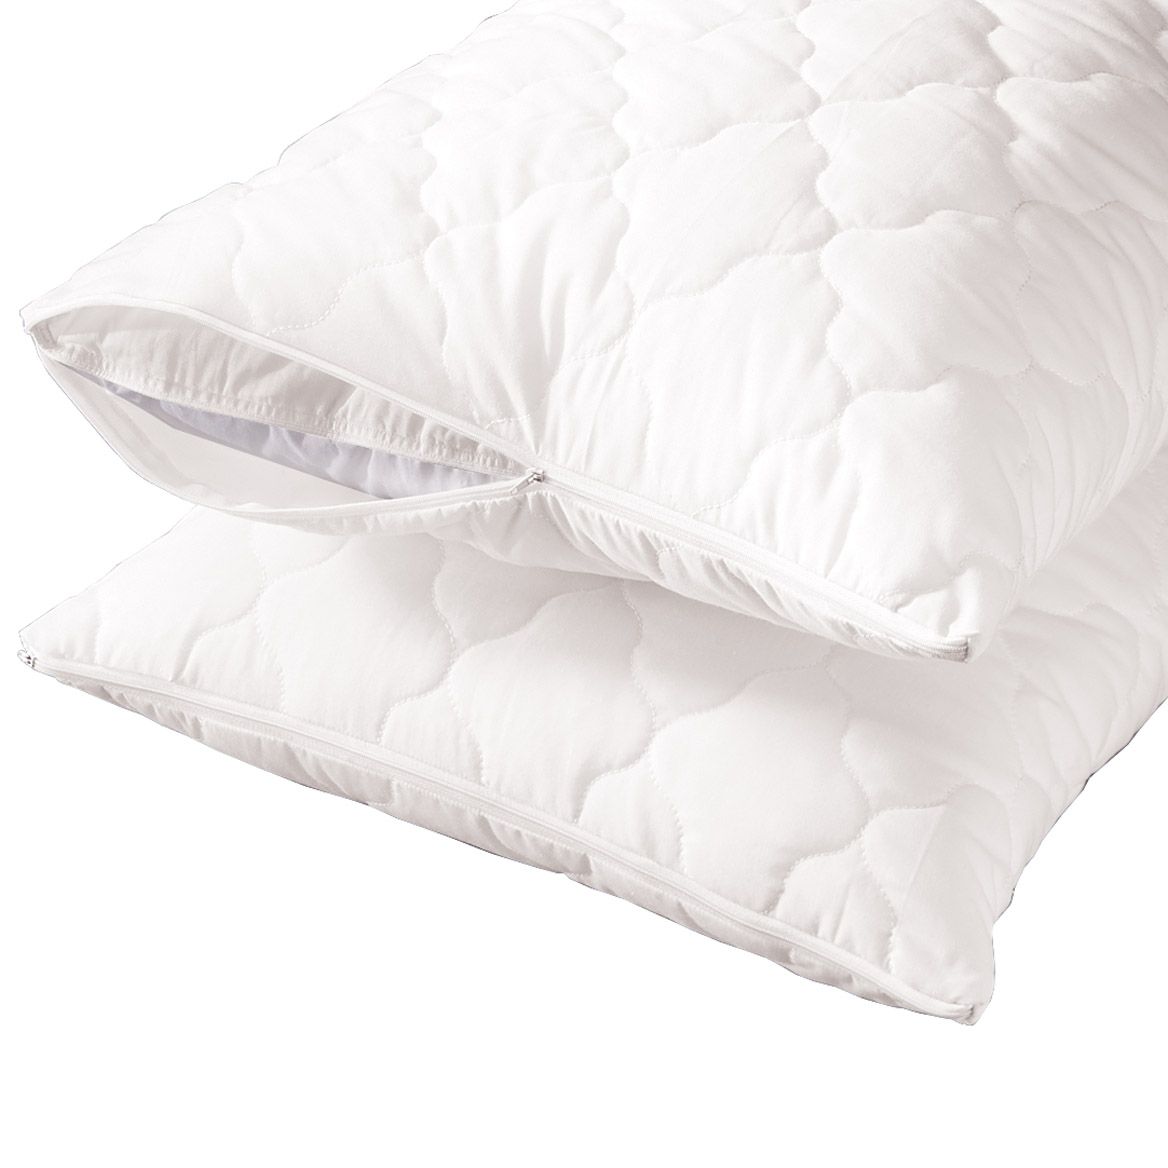 Quilted Pillow Covers Set/2 + '-' + 302728